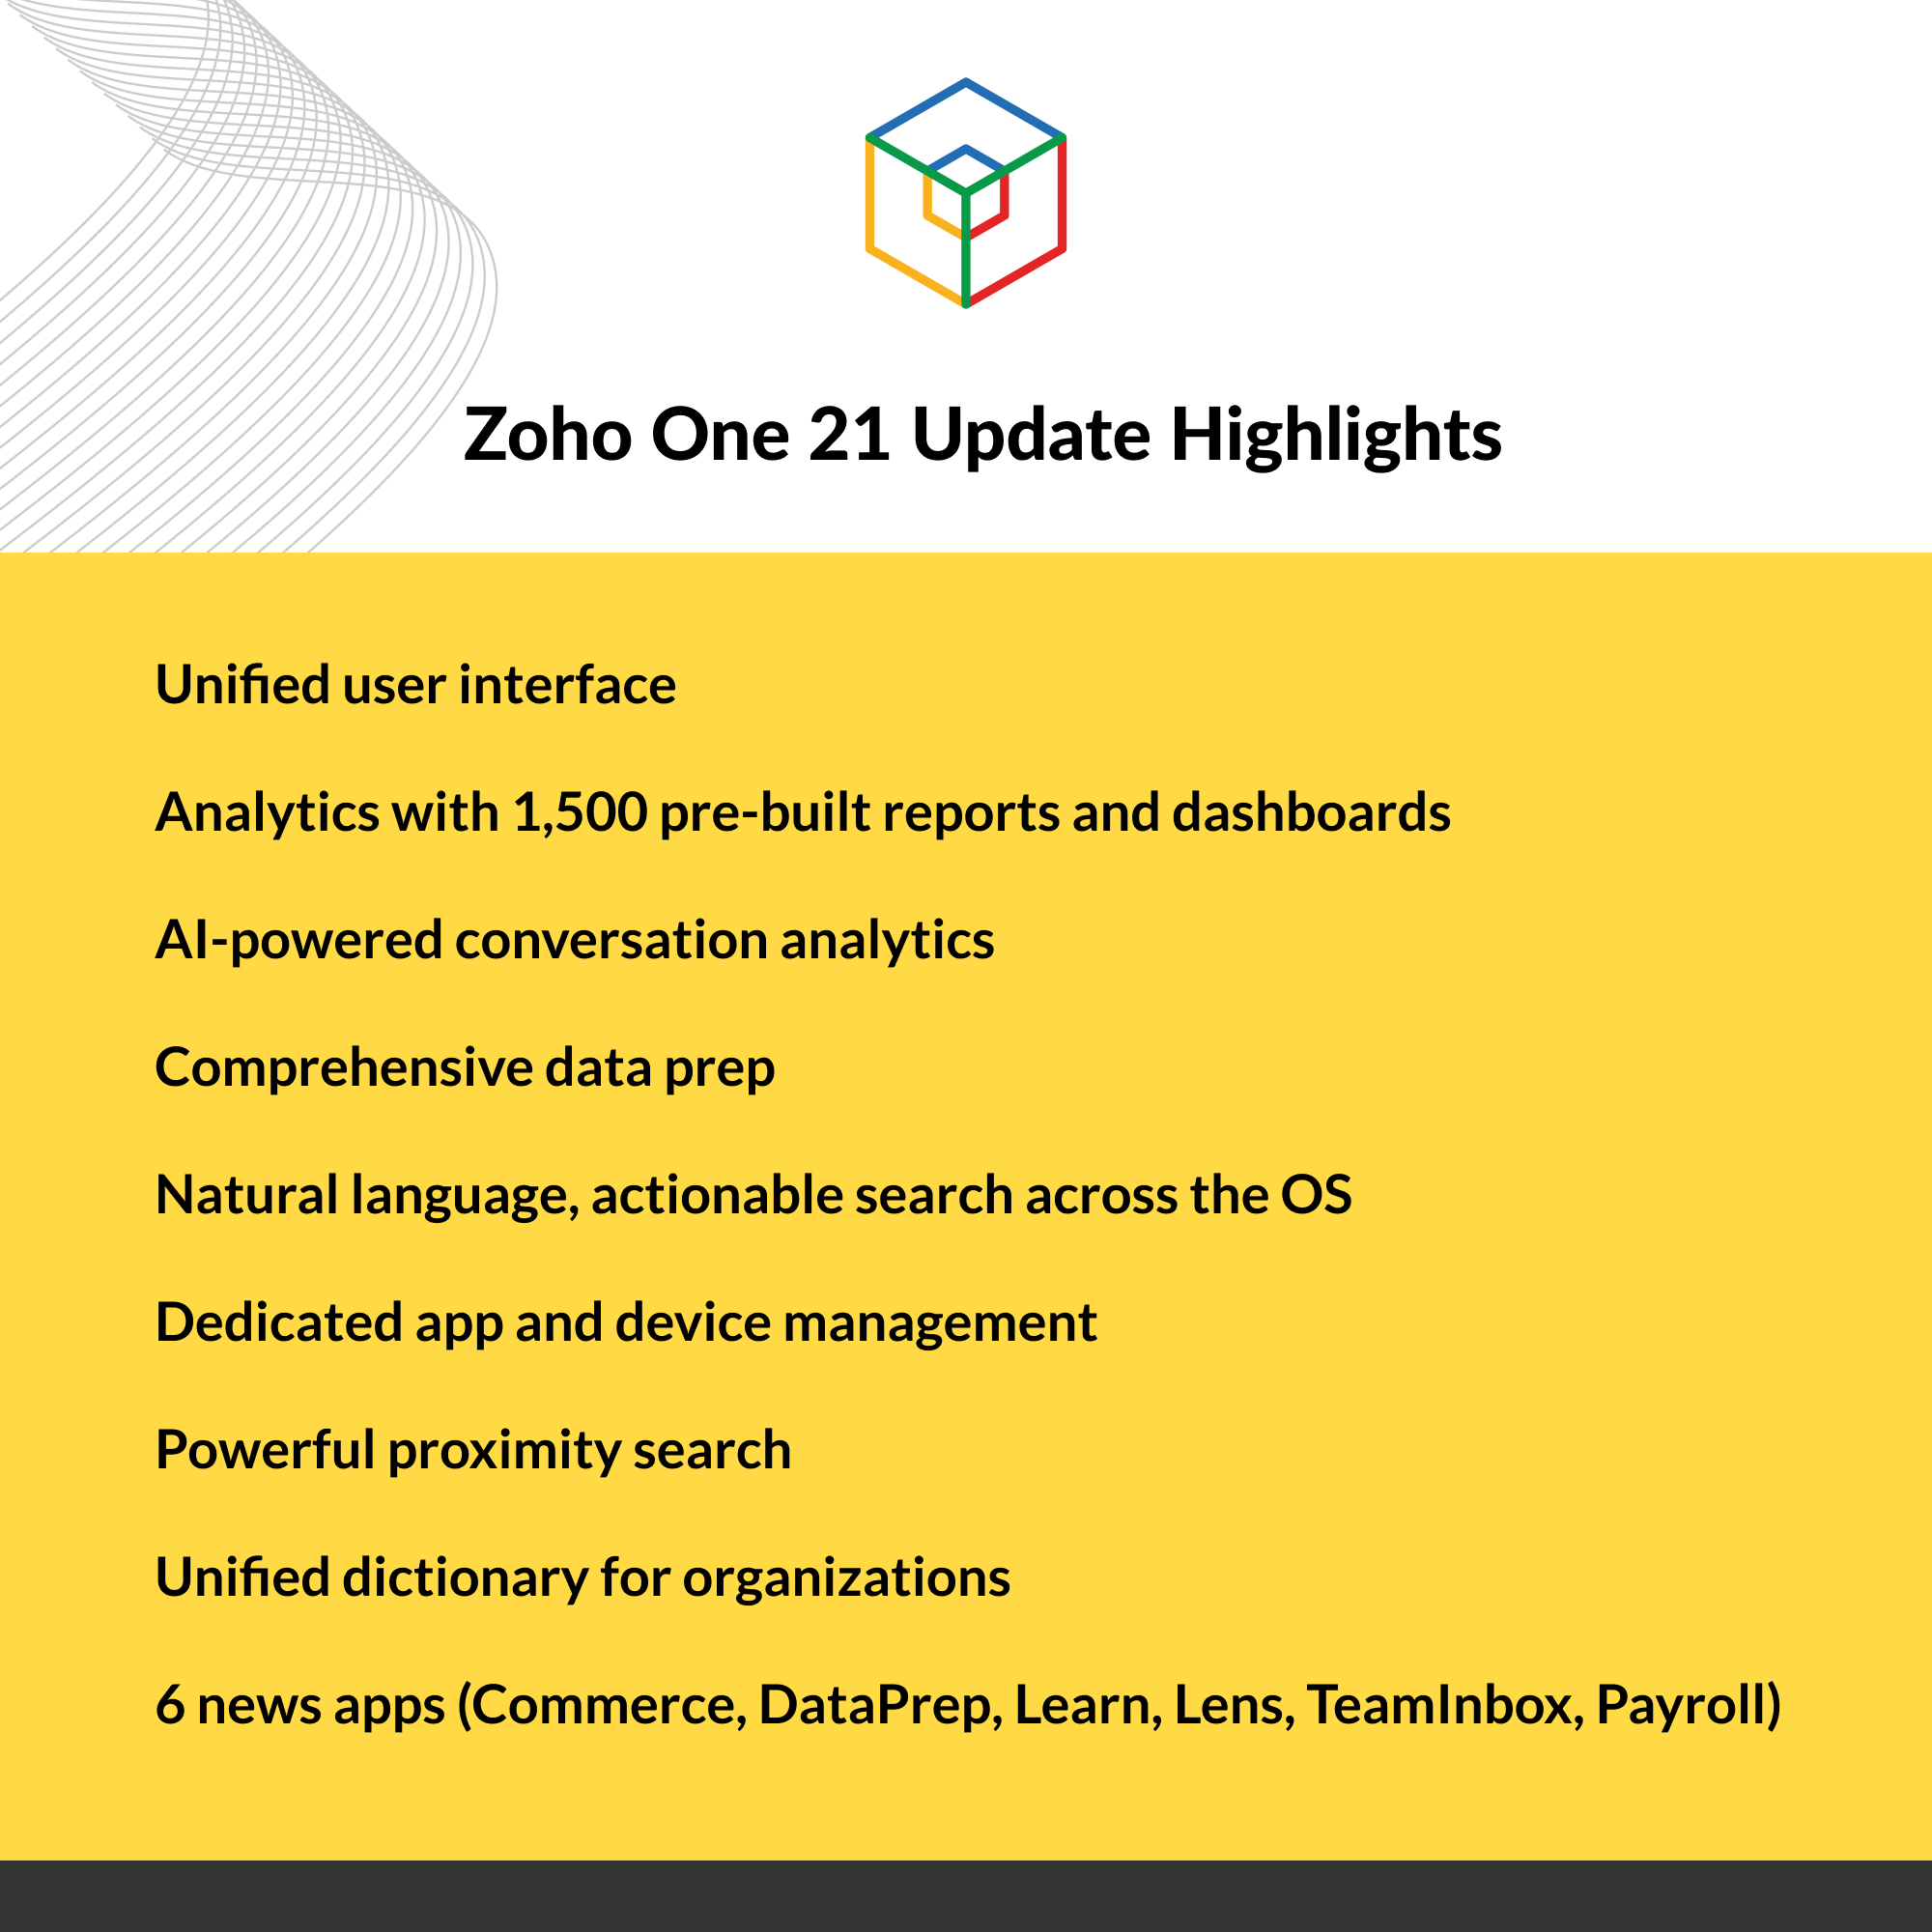 It describes the product release highlights of the Zoho One product software.